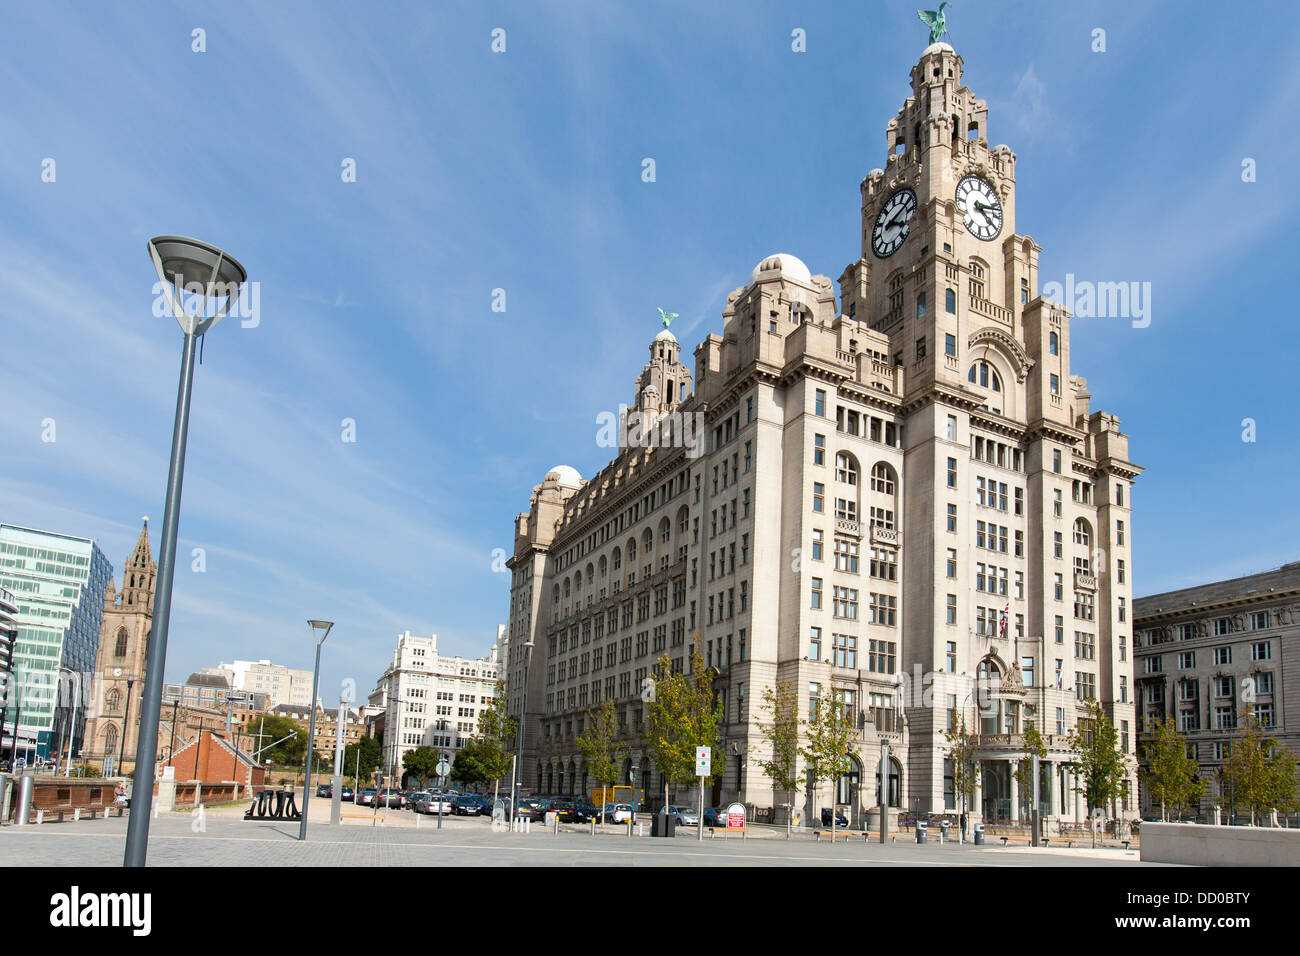 The Royal Liver Building, one of Liverpool's three graces that make the river Mersey's iconic waterline. Stock Photo